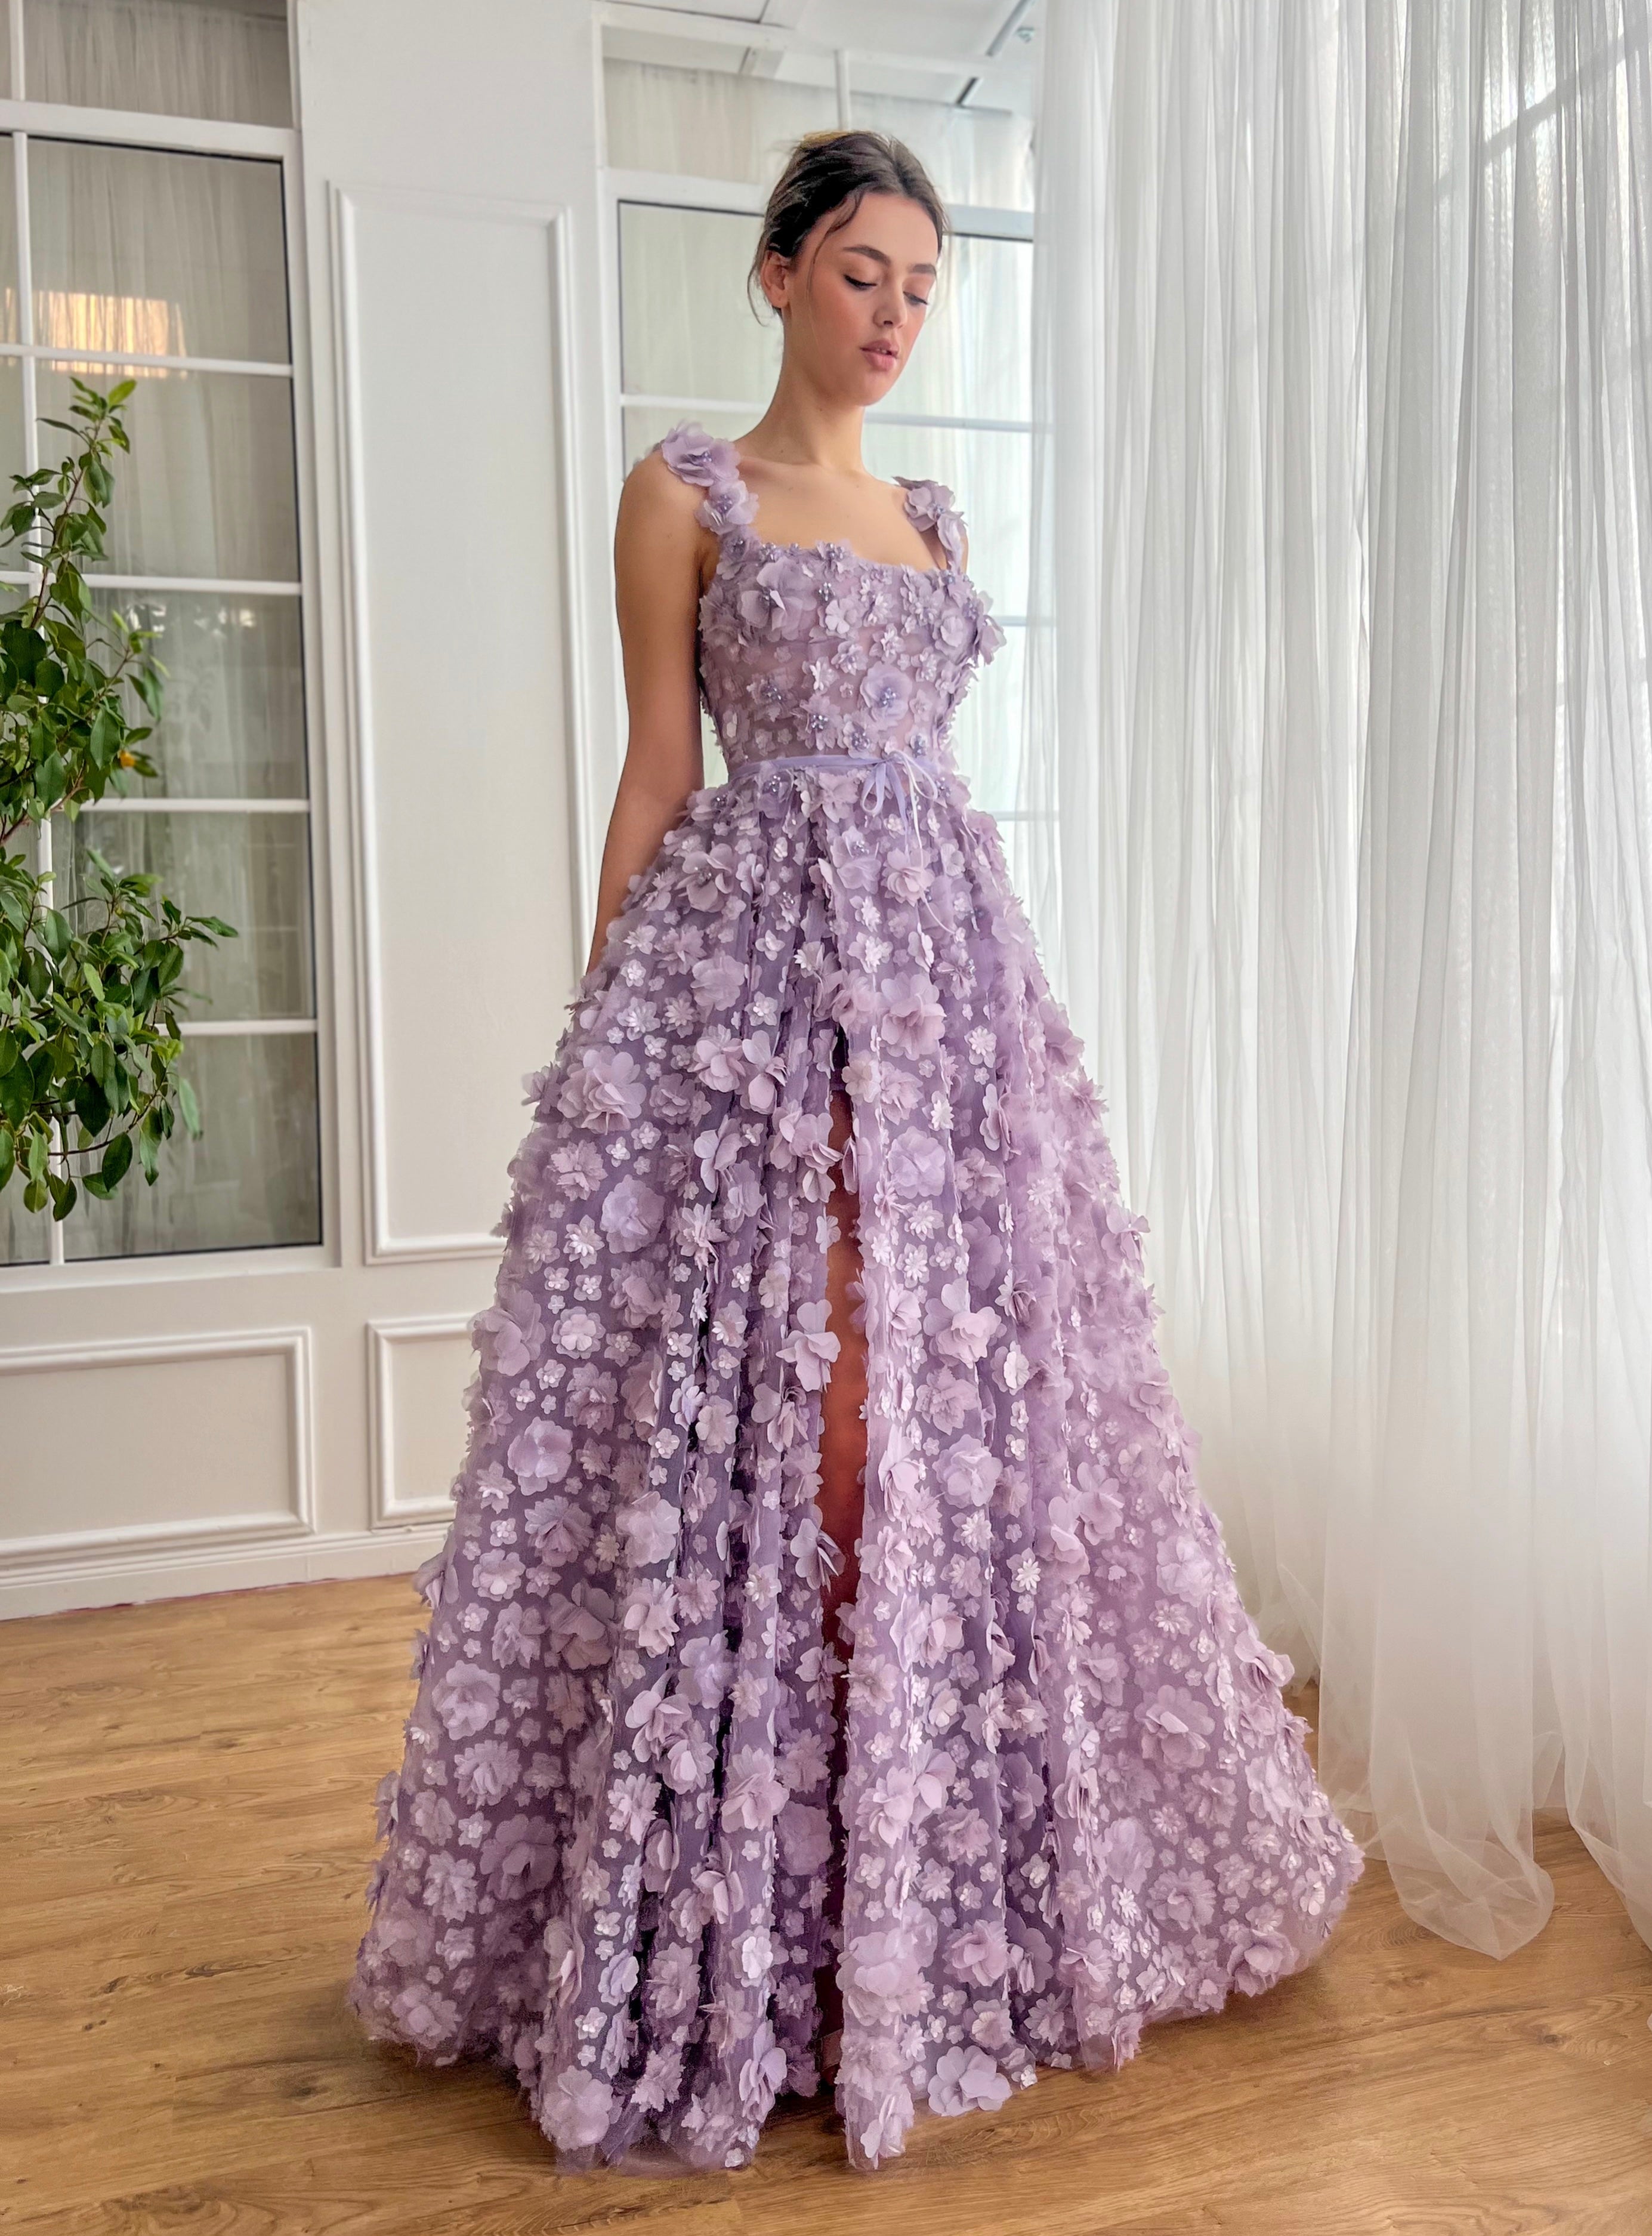 Lavender Halter Neck Two Piece Rhinestone Prom Dress with Tulle Skirt